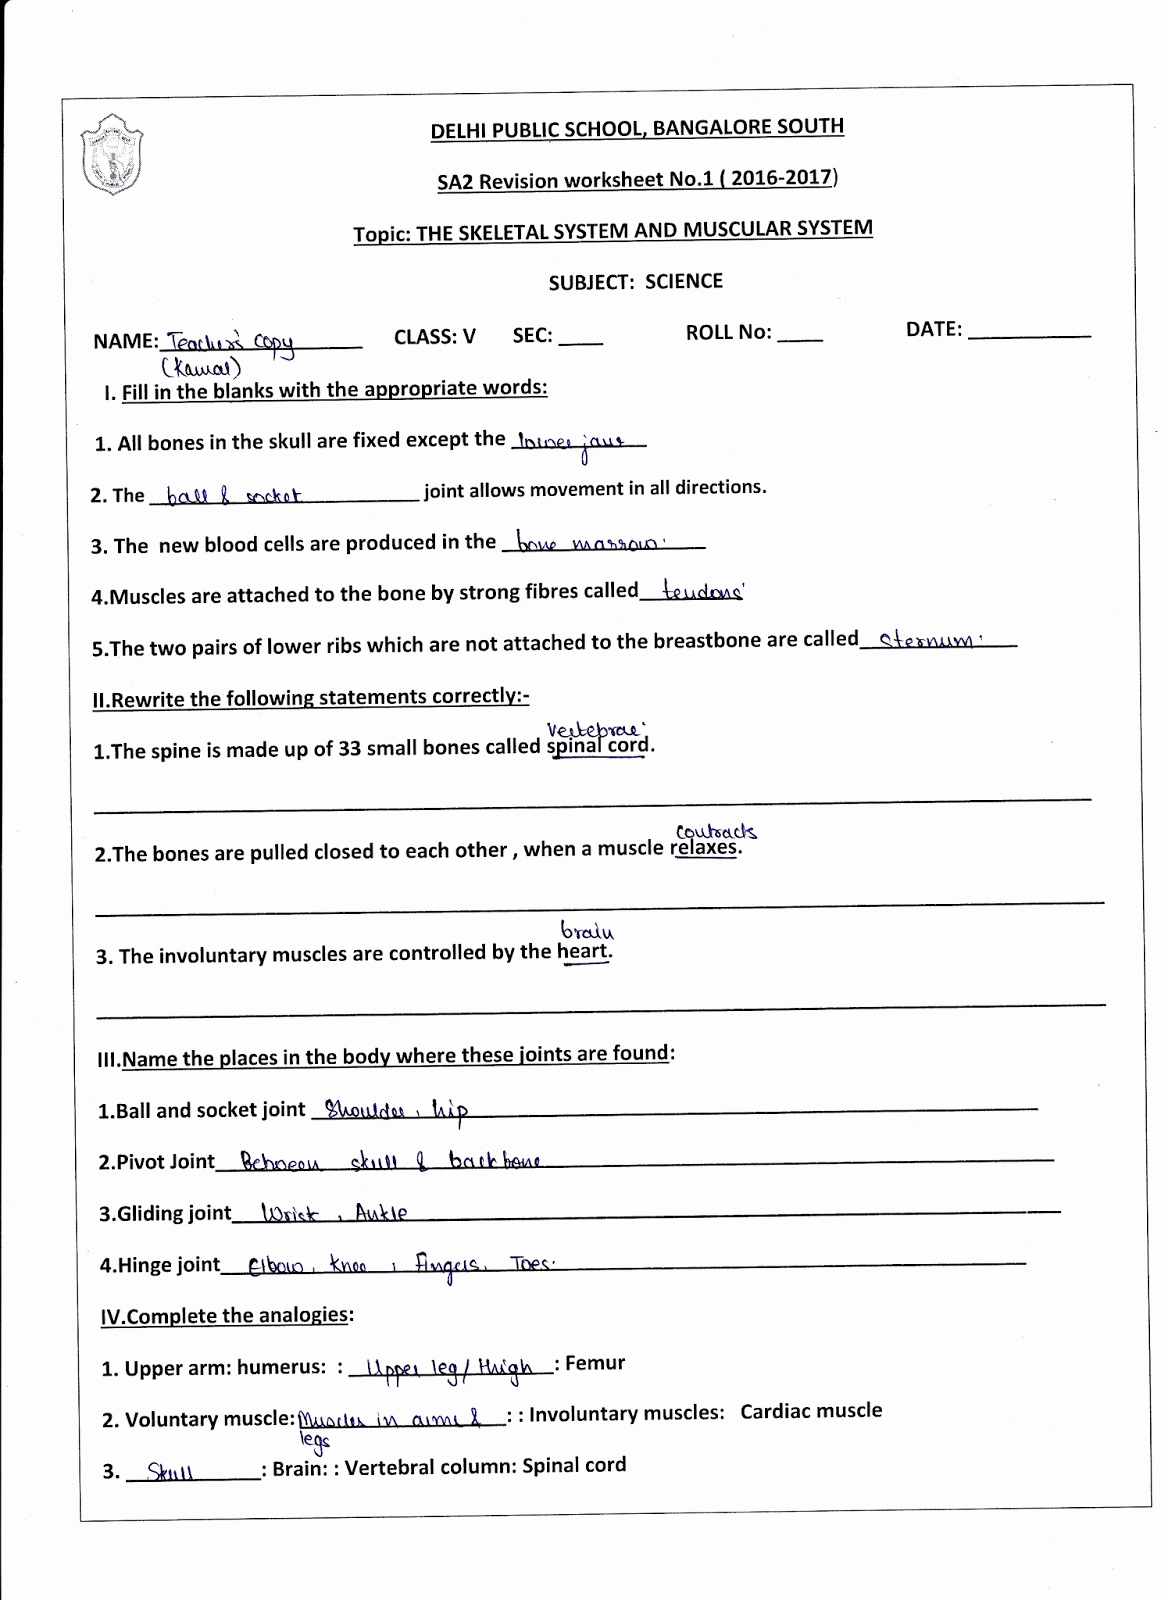 Science Worksheets for 5th Grade Luxury 5th Grade Science Worksheets with Answer Key